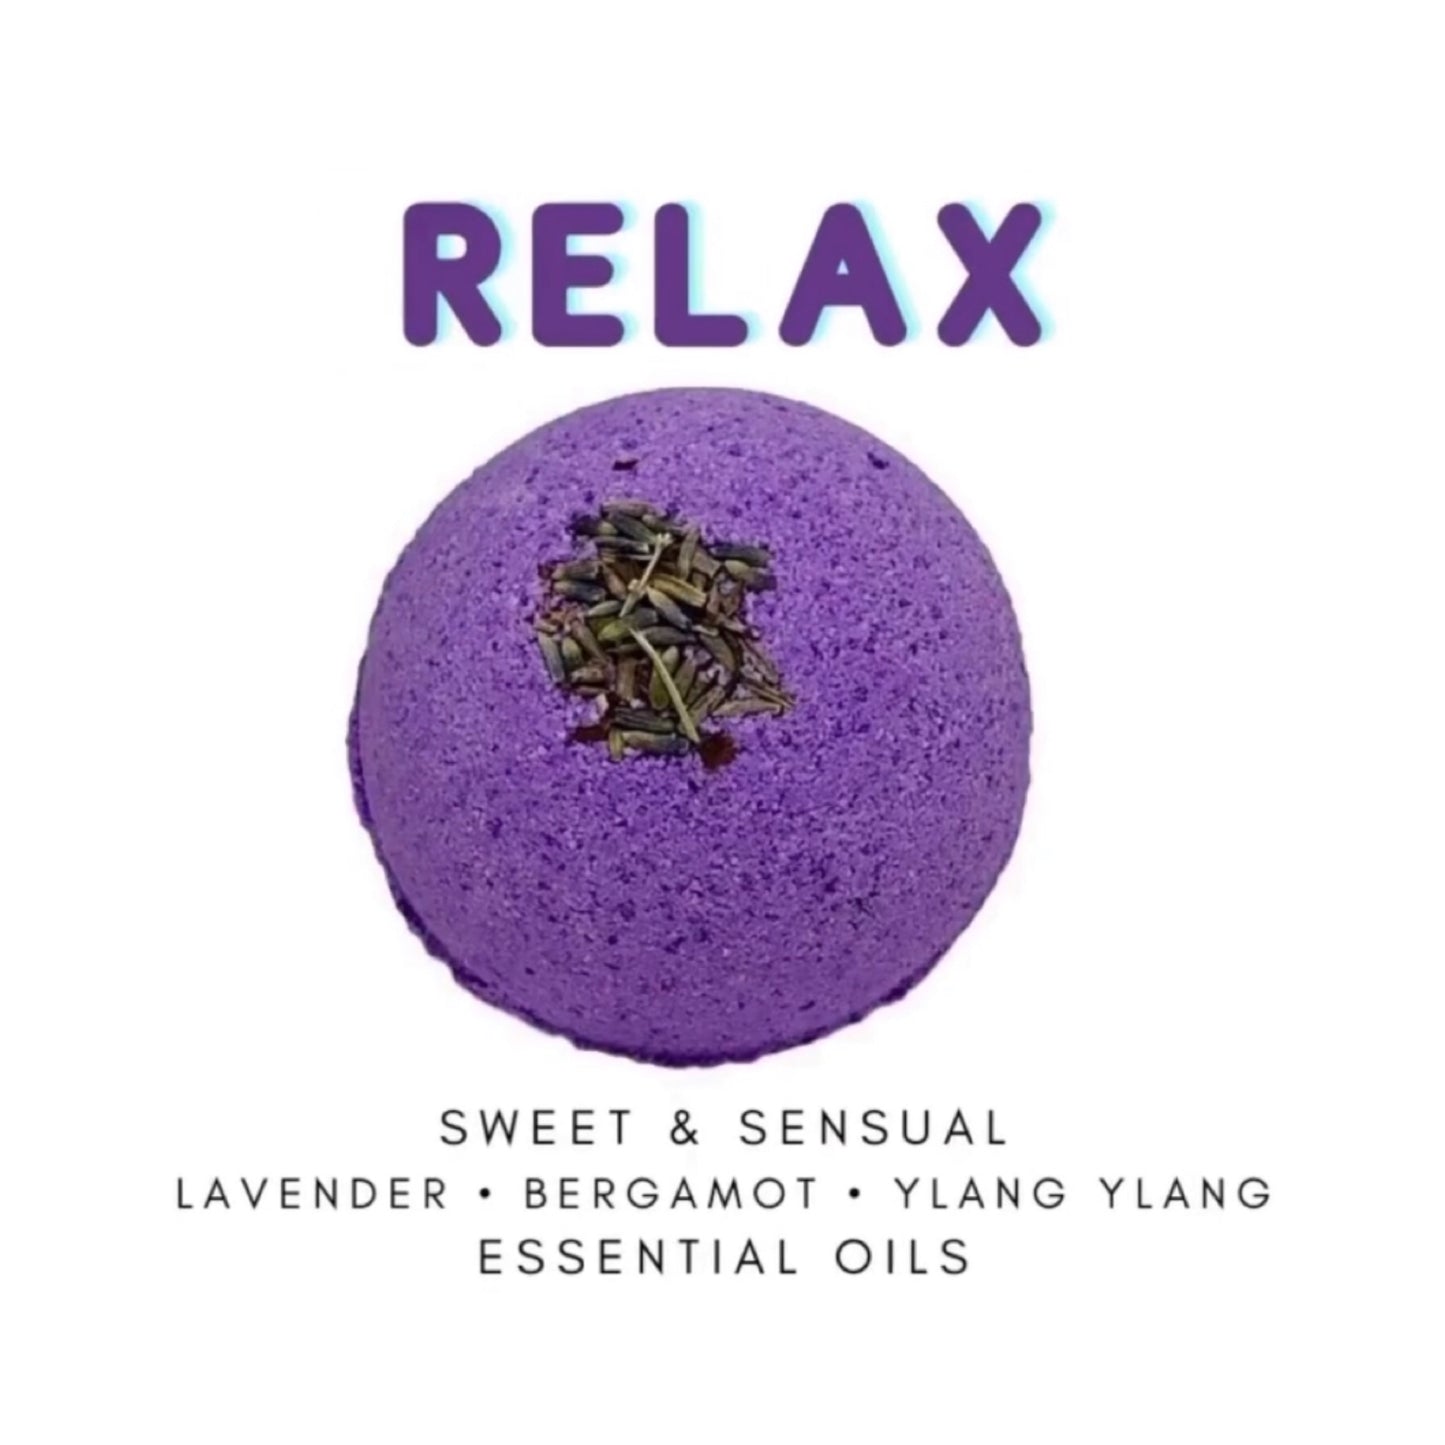 Bliss Delights x Stephanie Llanelli Cosmetics Relax Bath Bomb with Ylang Ylang Essential Oils